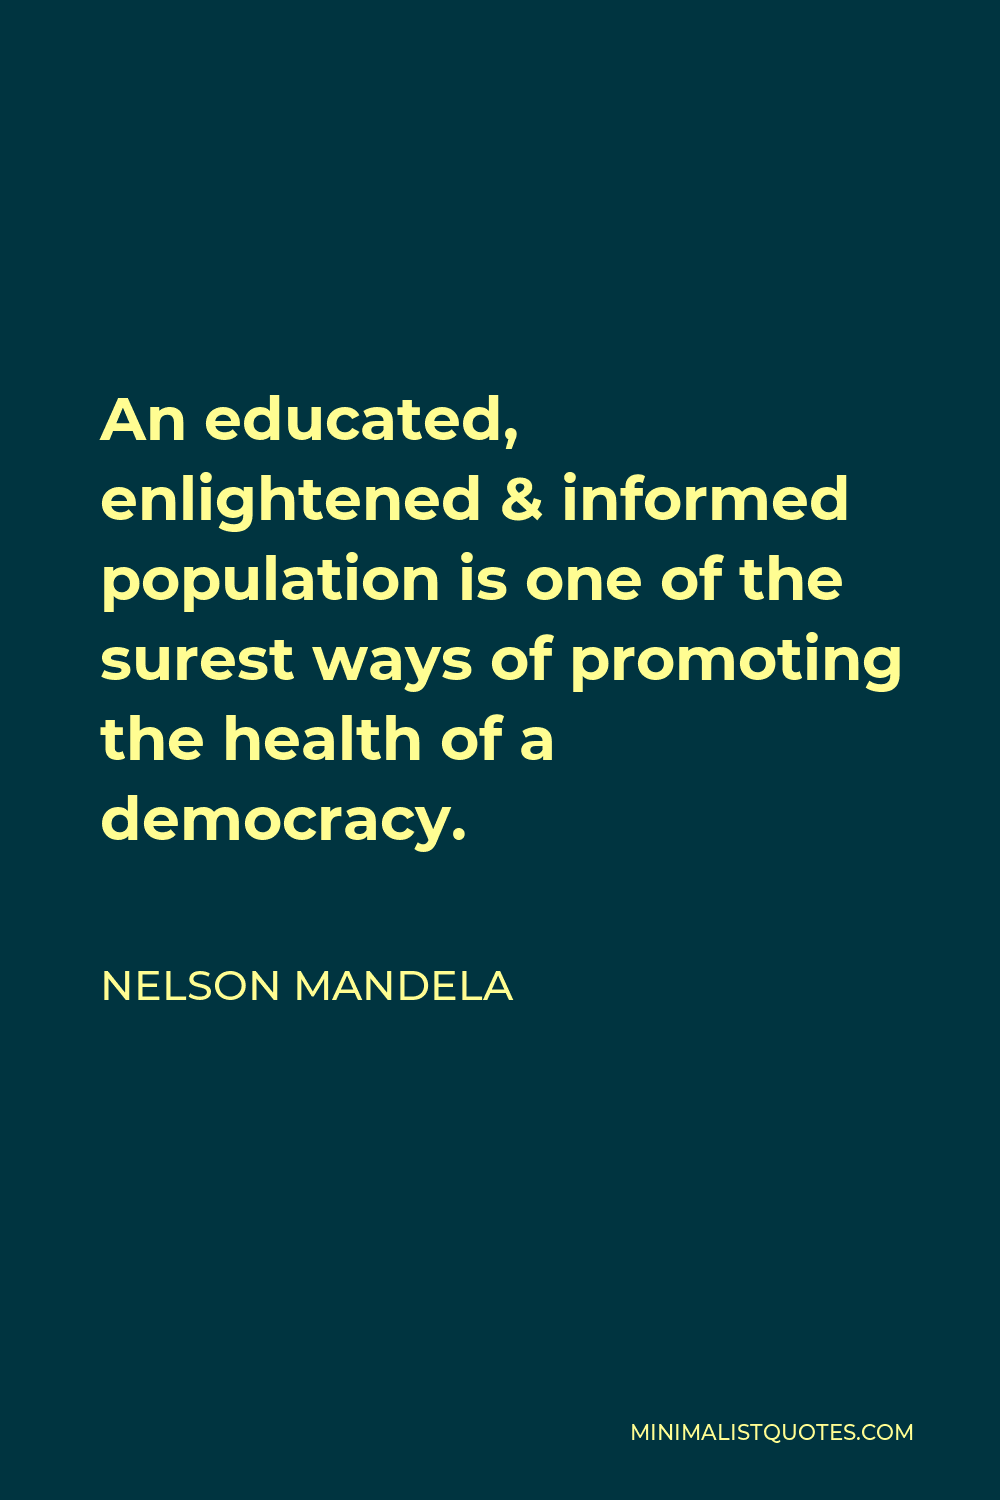 Nelson Mandela Quote - An educated, enlightened & informed population is one of the surest ways of promoting the health of a democracy.